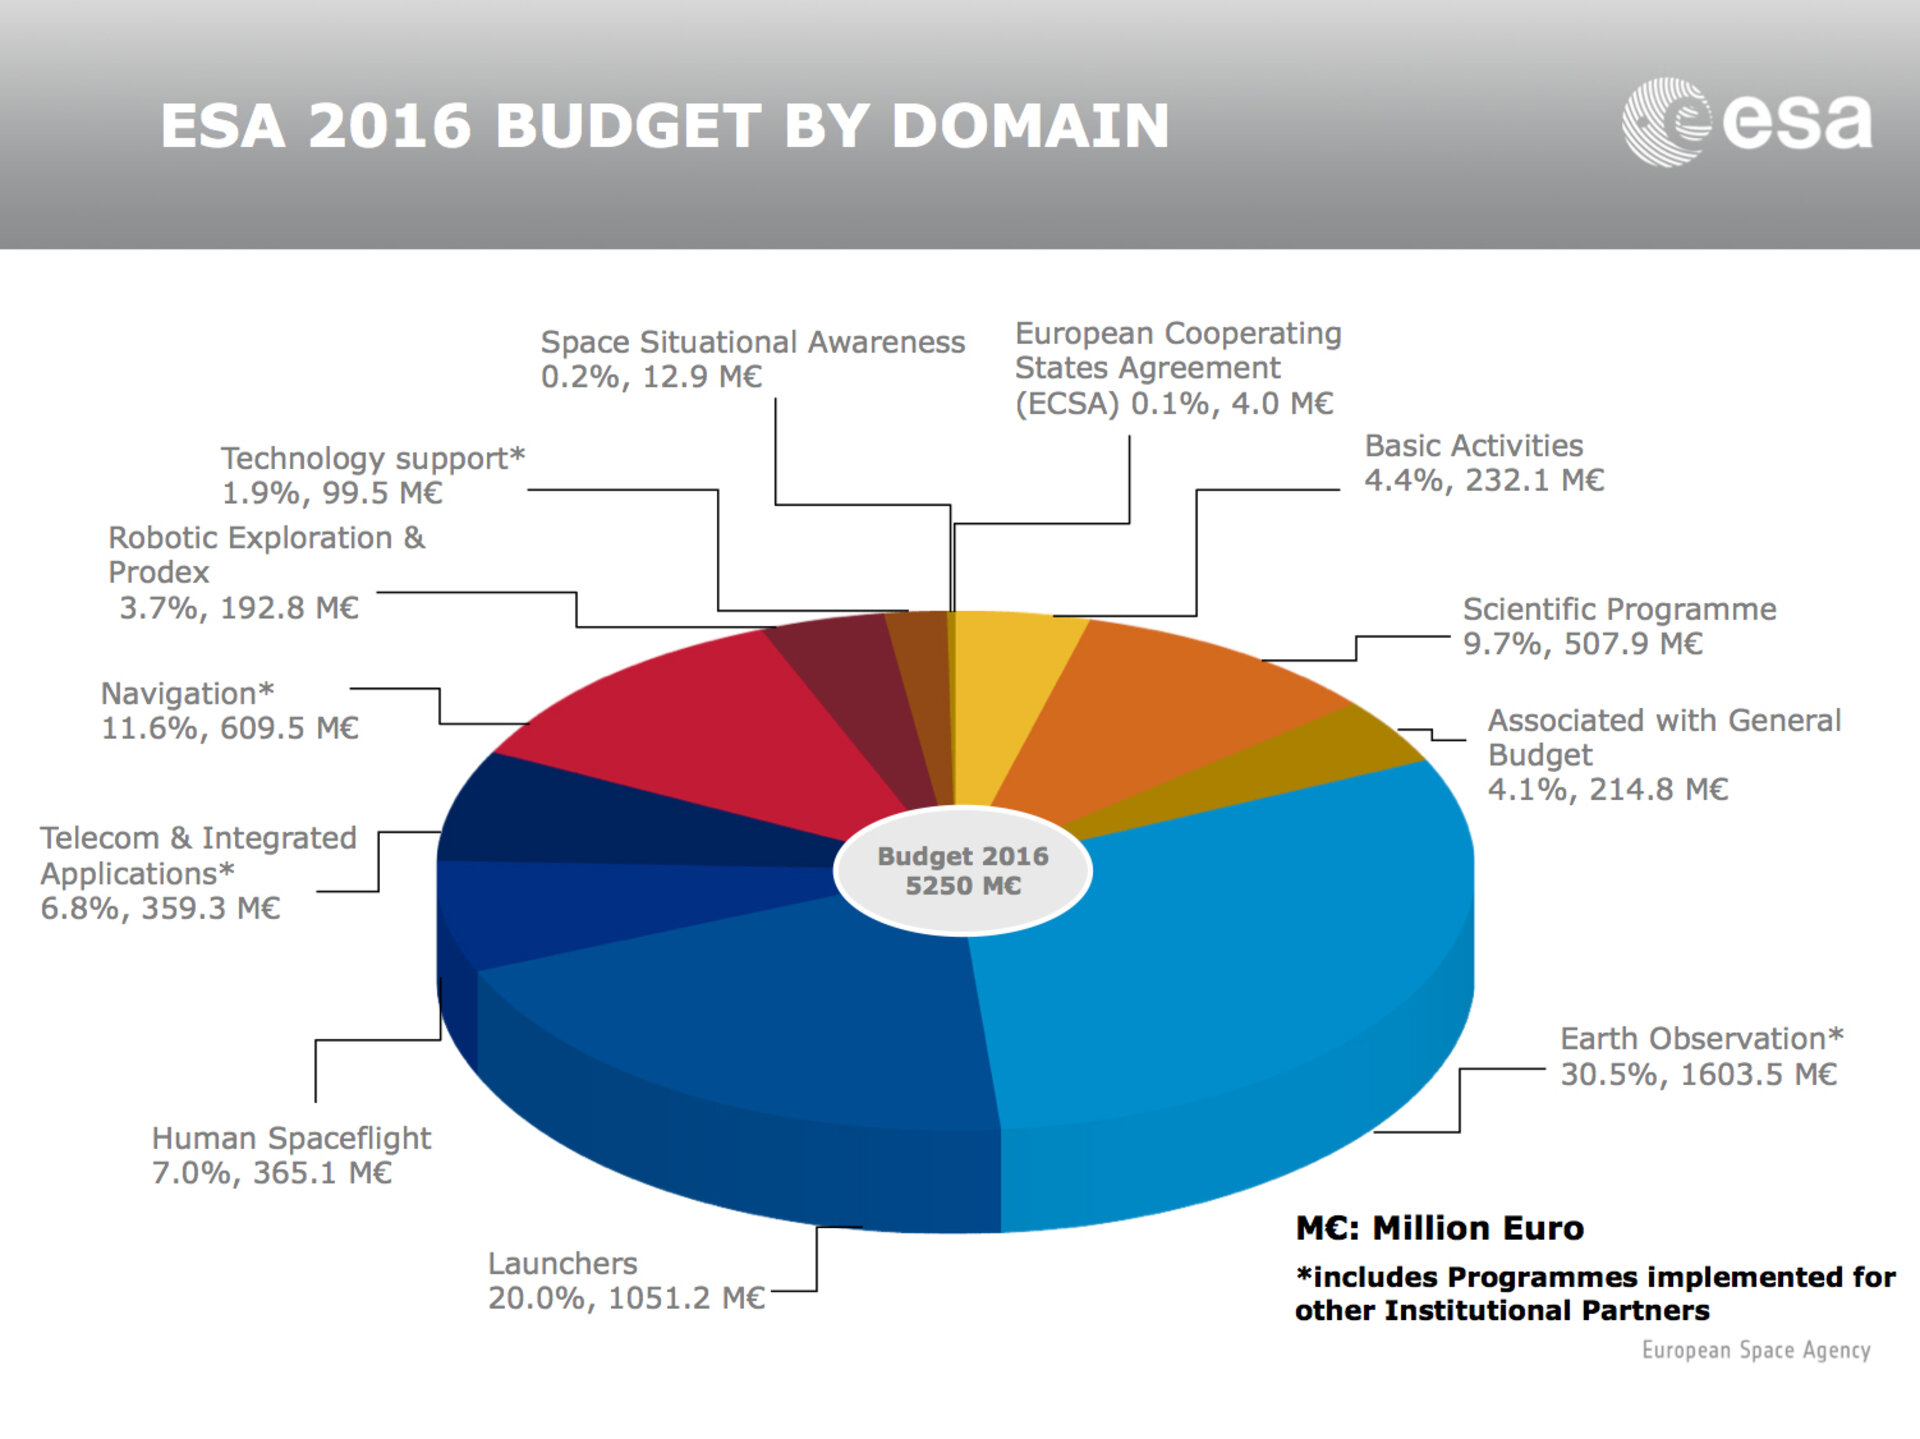 ESA budget 2016 by domain